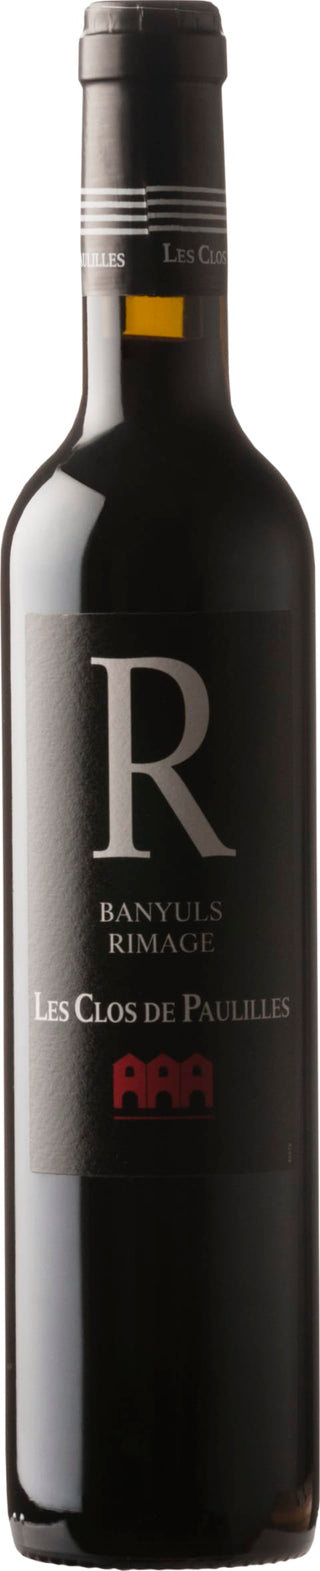 Domaine Cazes Banyuls Rimage, 50cl 2021 50cl6x75cl - Just Wines 